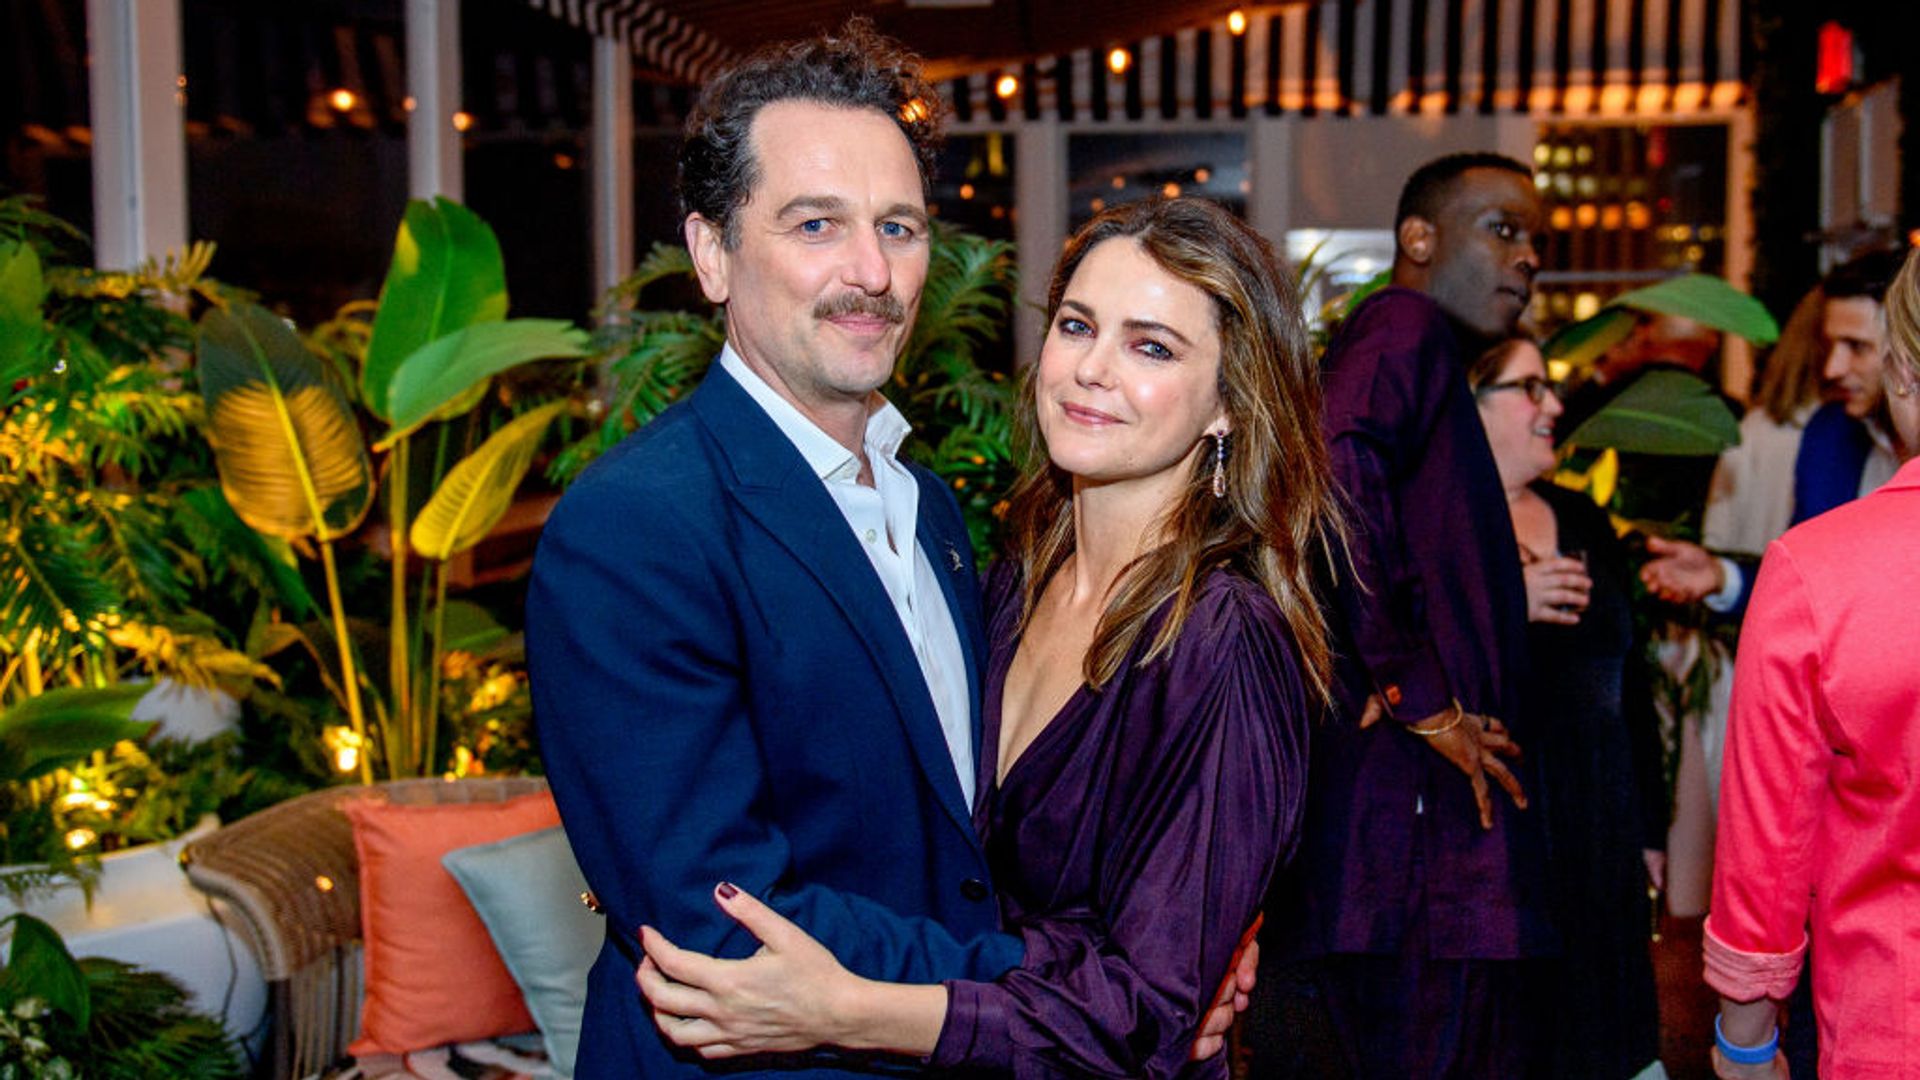 Keri Russell and Matthew Rhys cuddled up at the after party for The Diplomat in New York